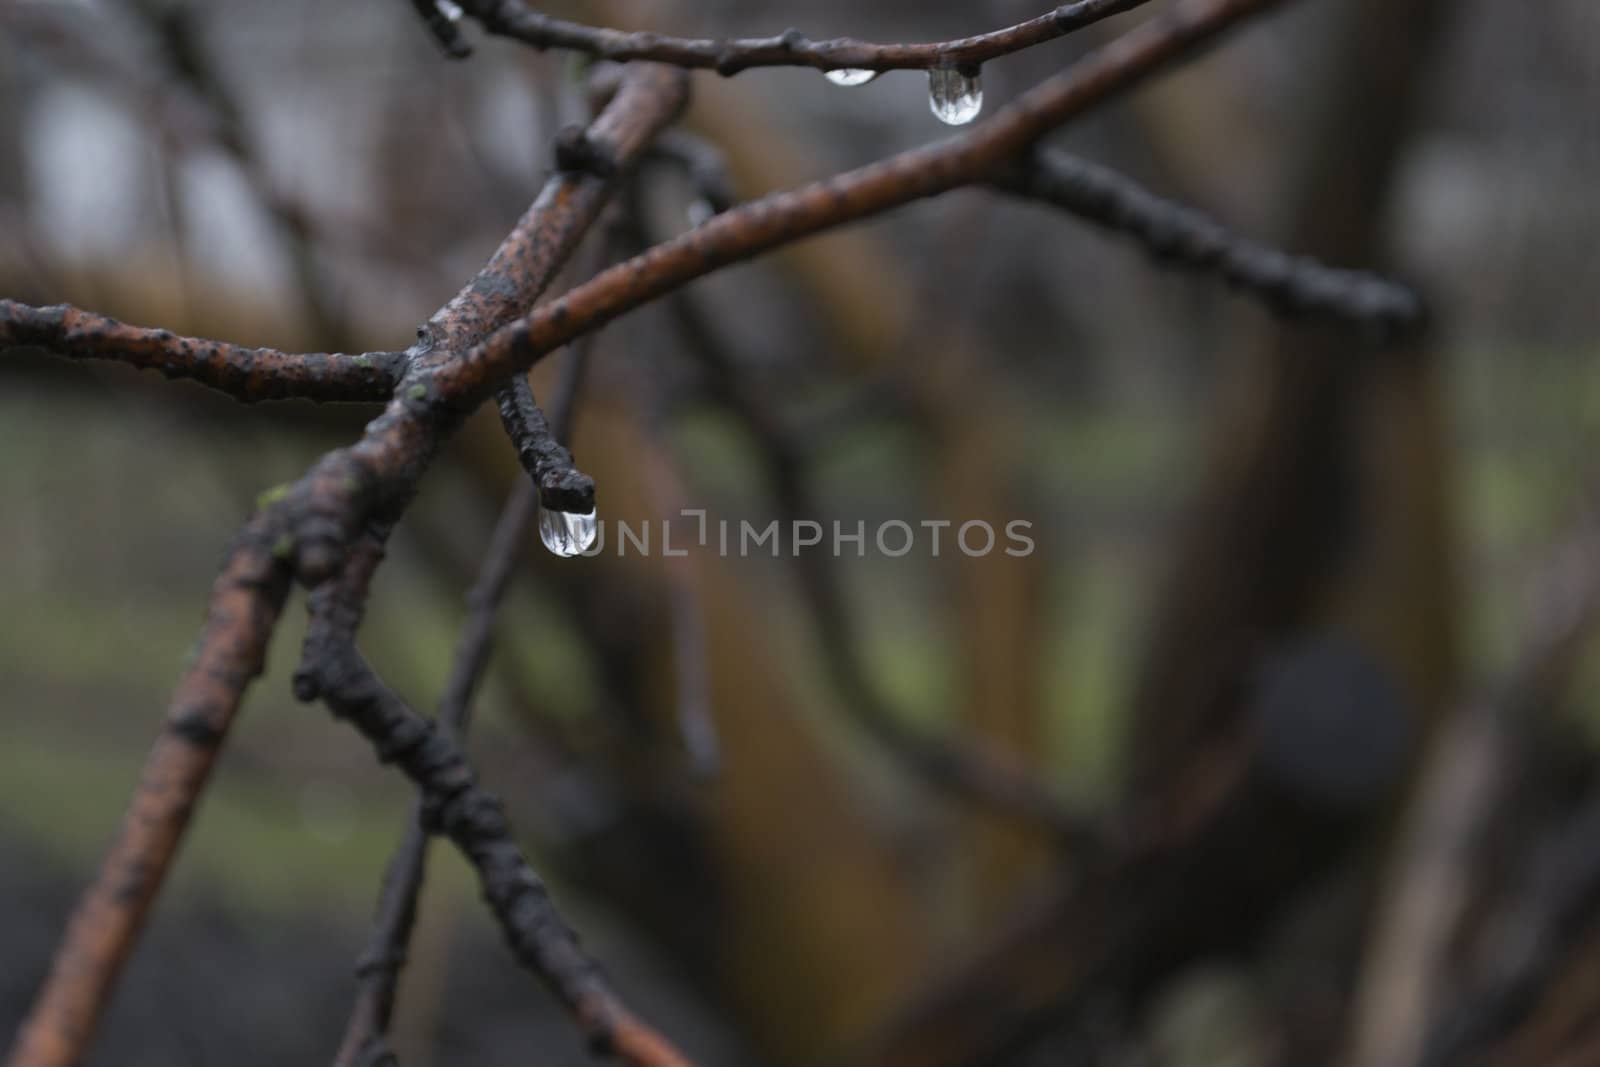 Raindrops on bare branches on a blurred background.